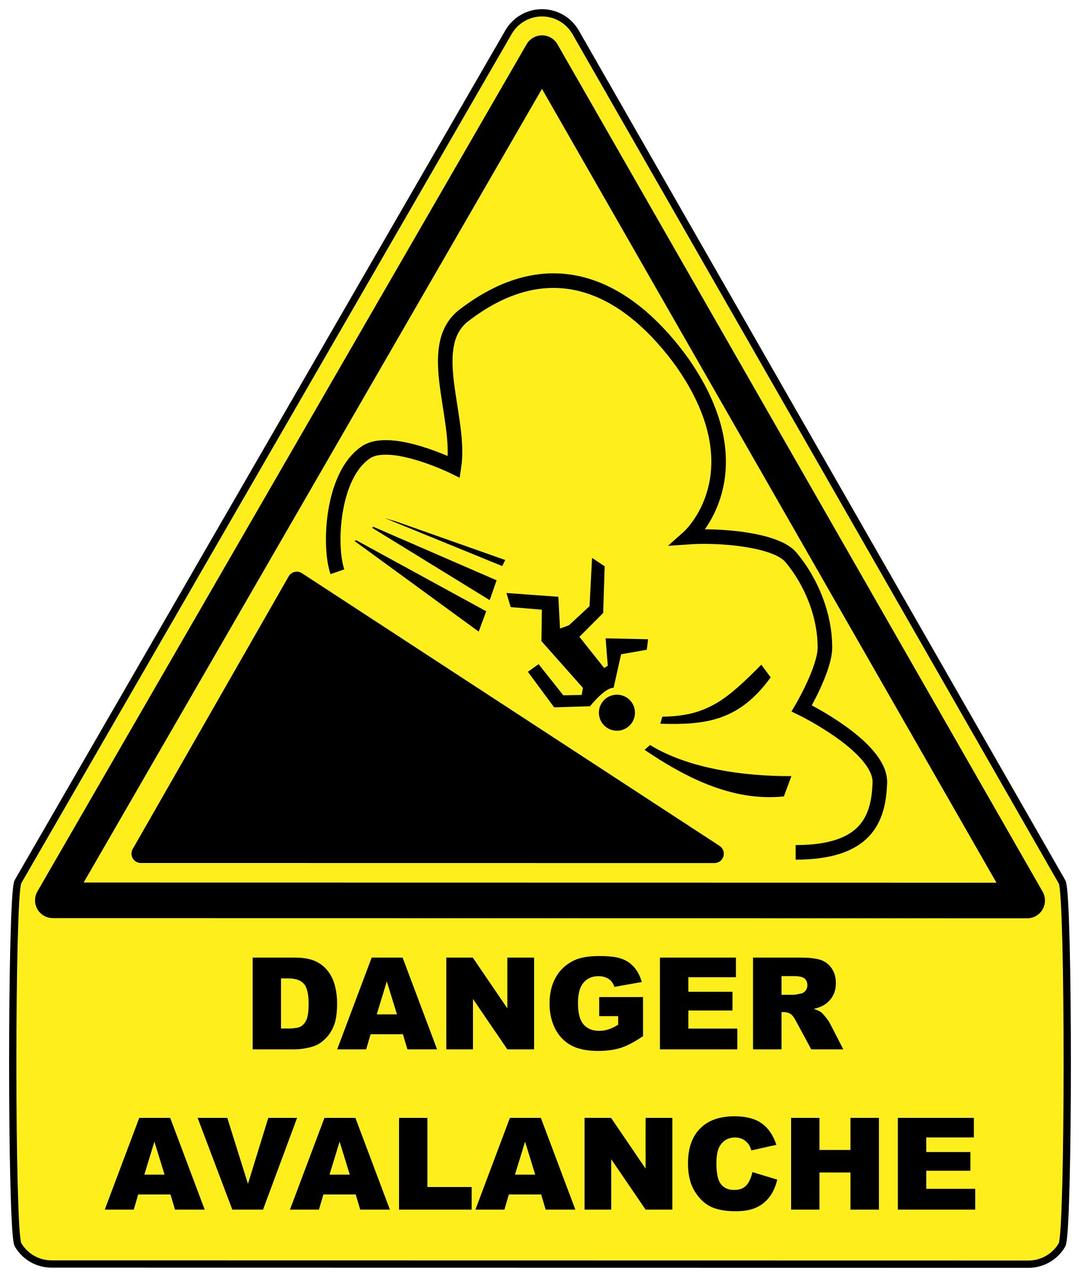 Avalanche warning sign png transparent